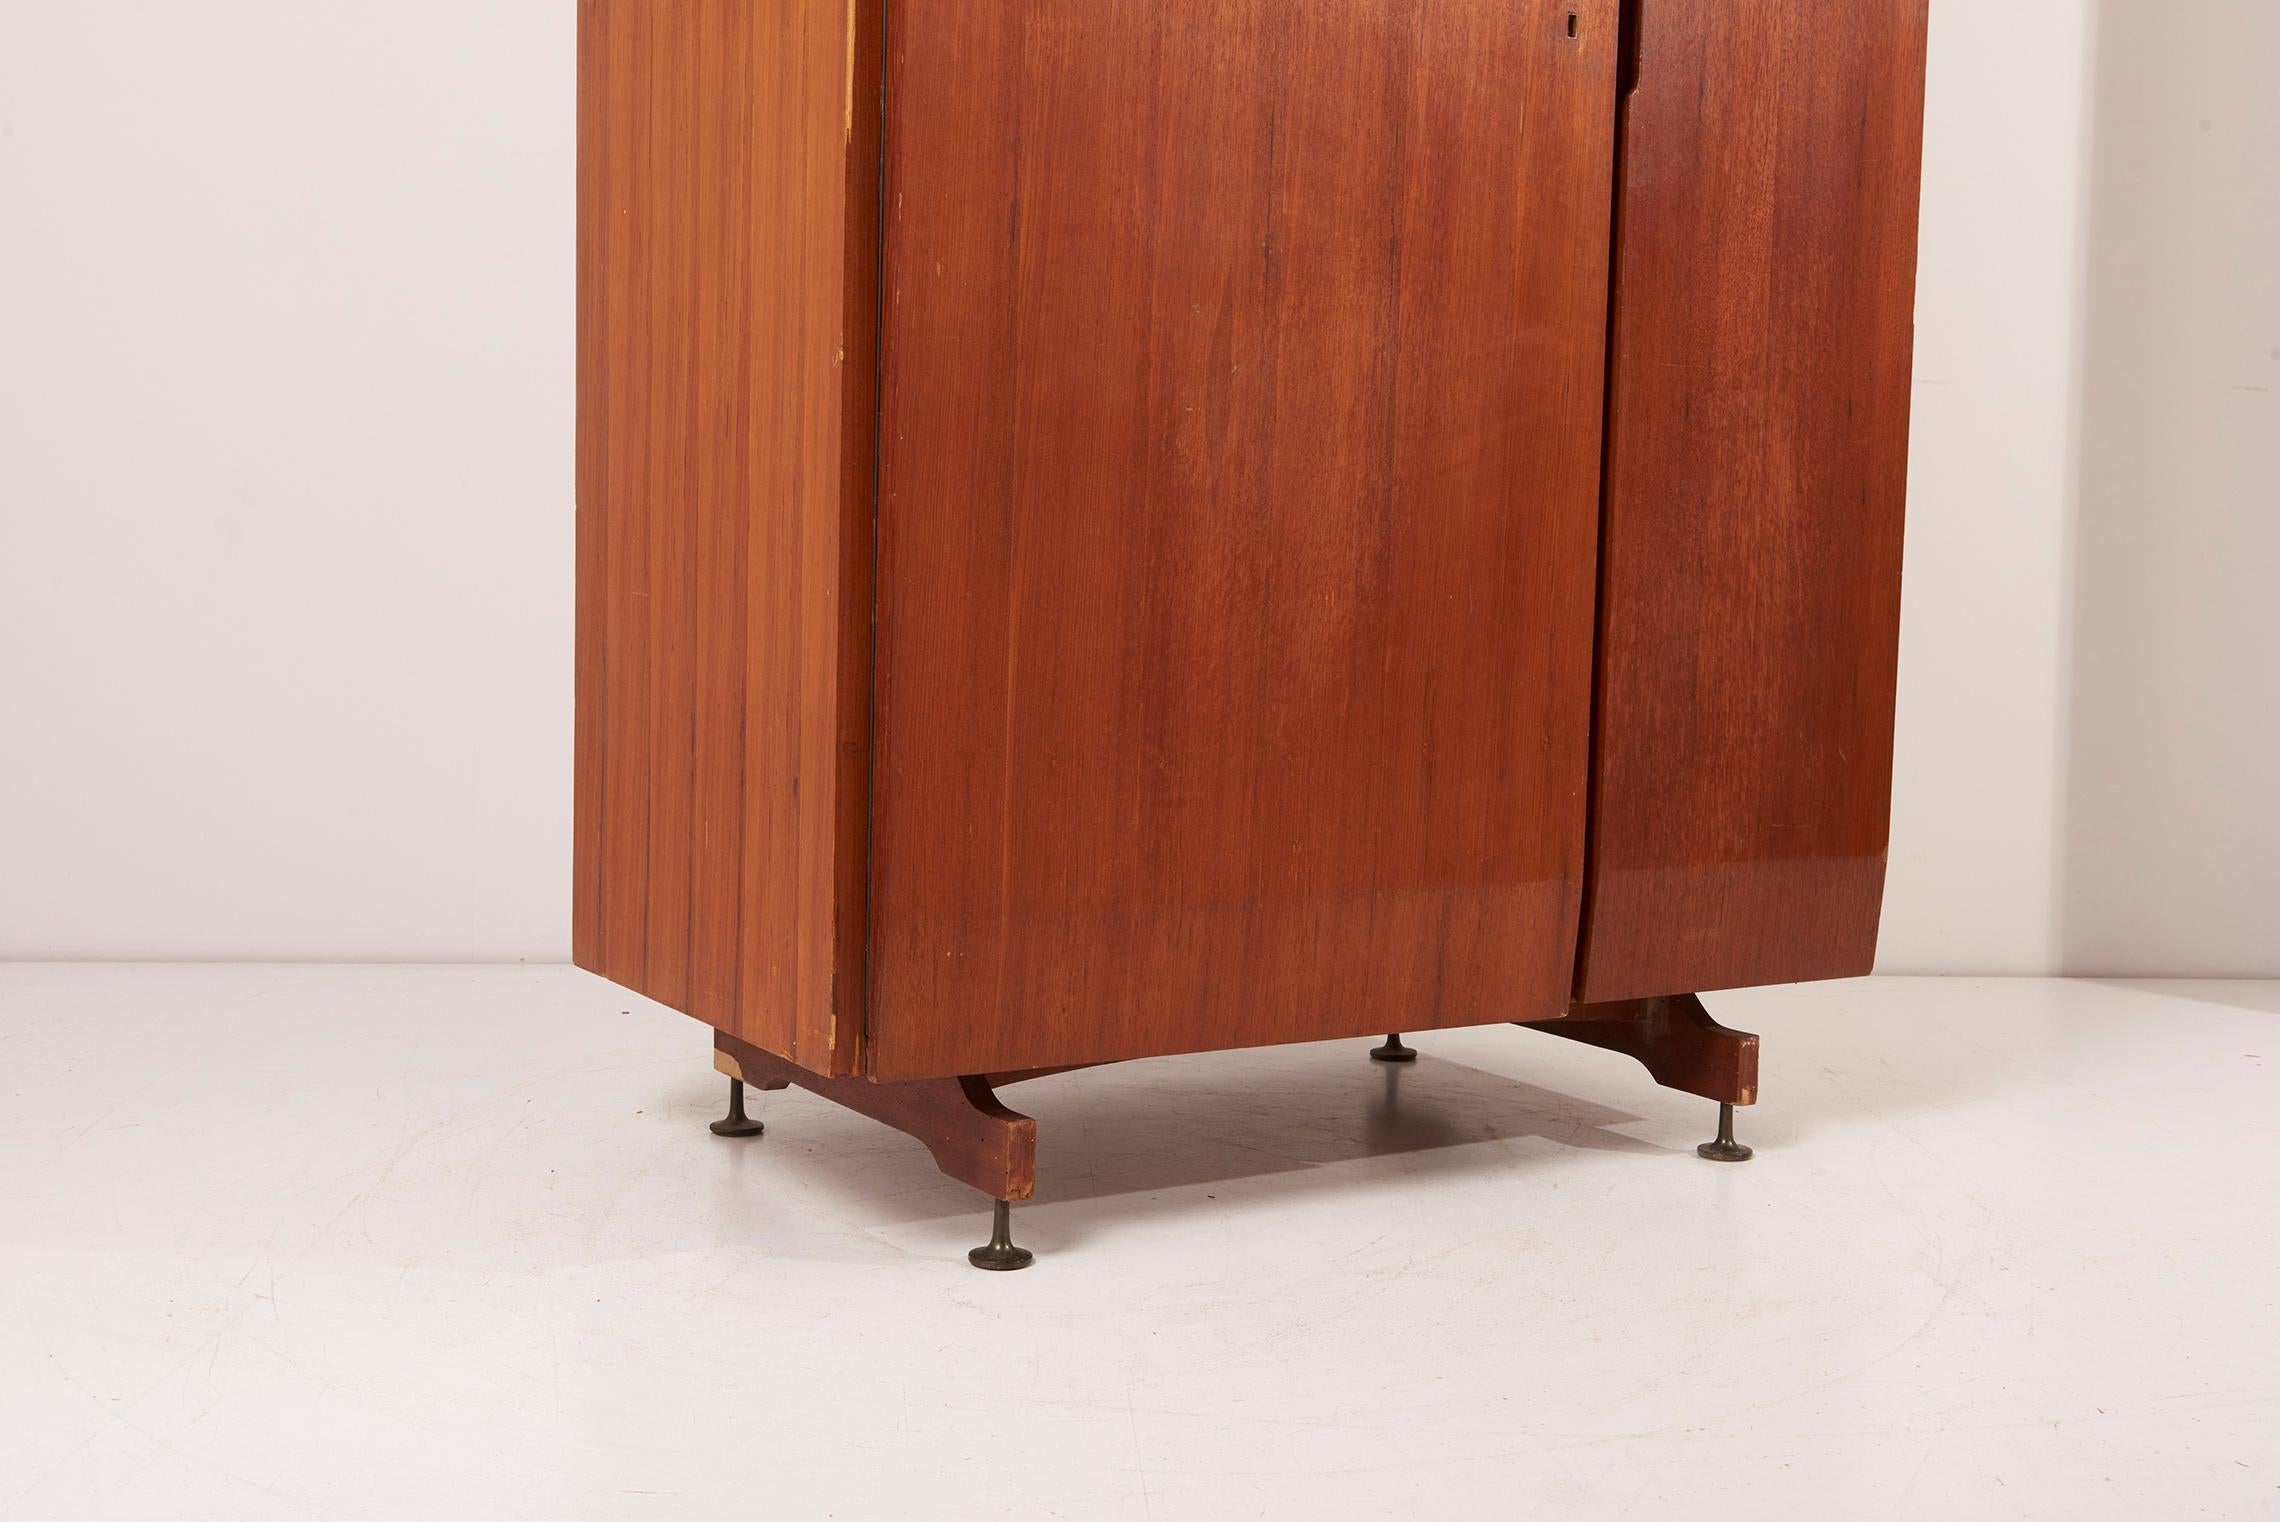 Architectural Wooden Cabinet, Italy, 1950s For Sale 4